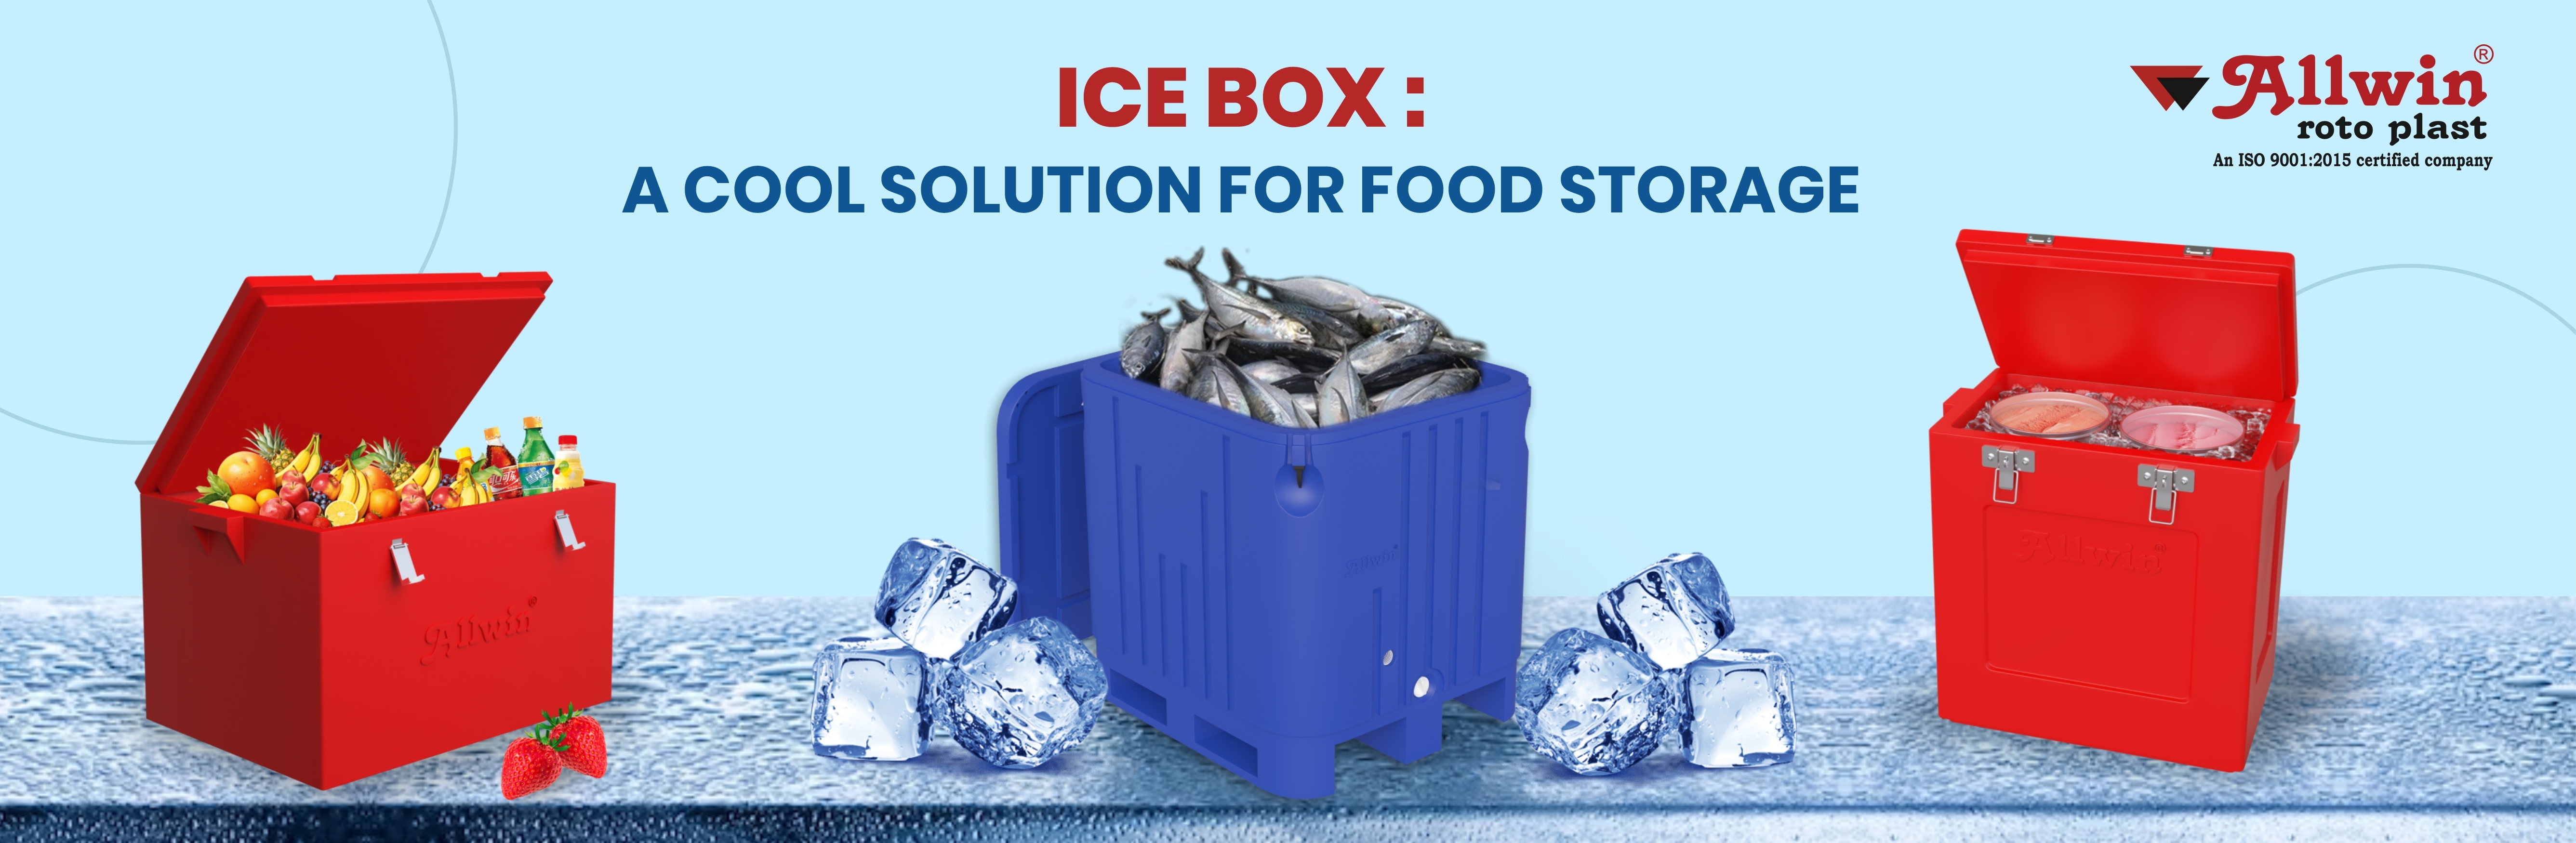 ®
11)

roto plast

wABllw

ICEBOX
A COOL SOLUTION FOR FOOD STORAGE

2015 certified company

An ISO 9001